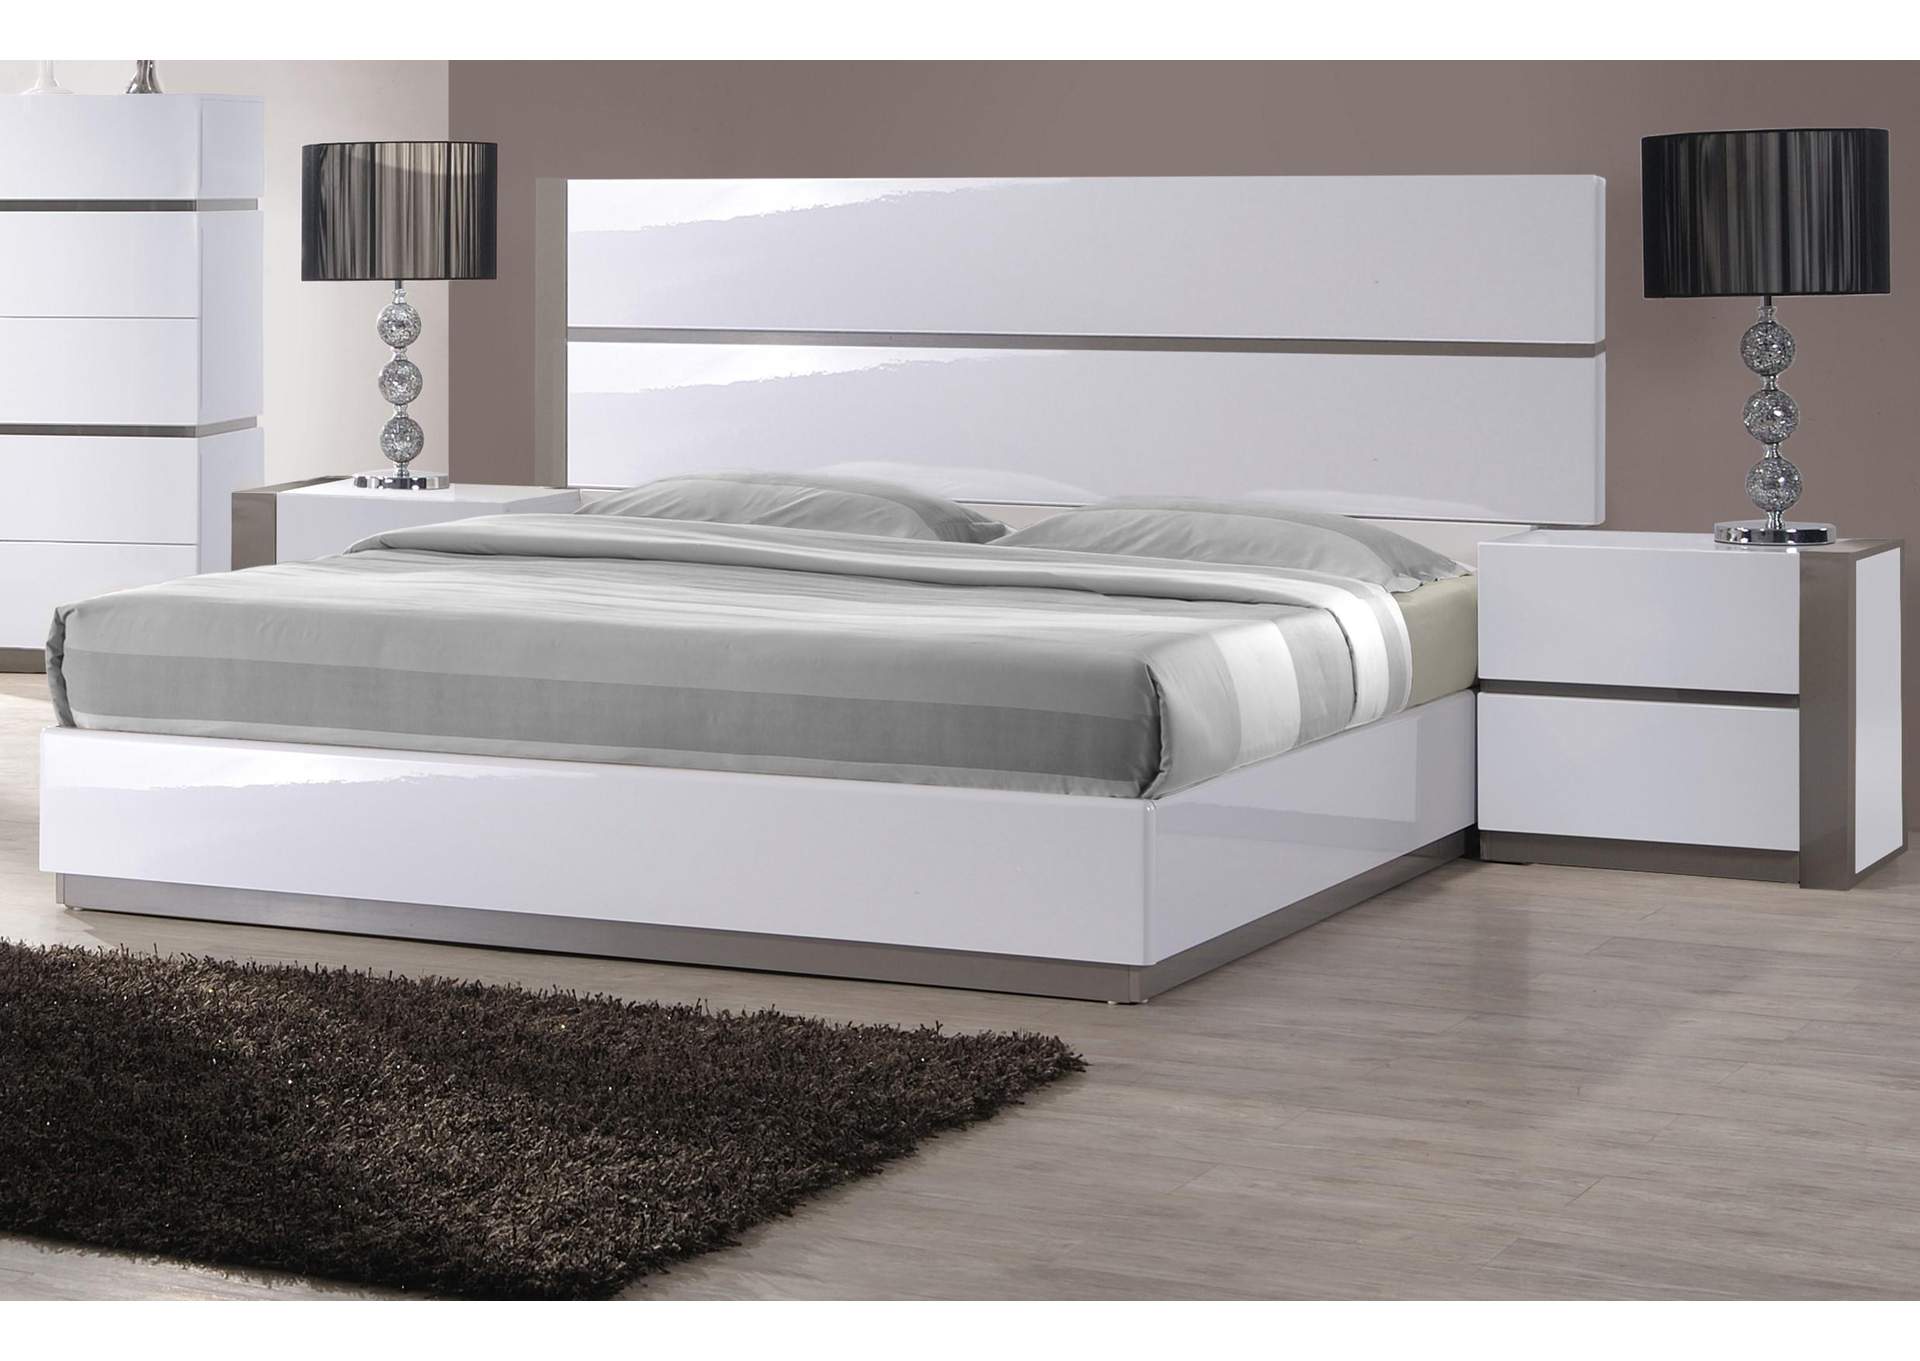 Manila White Modern 2-Tone Queen Bed,Chintaly Imports